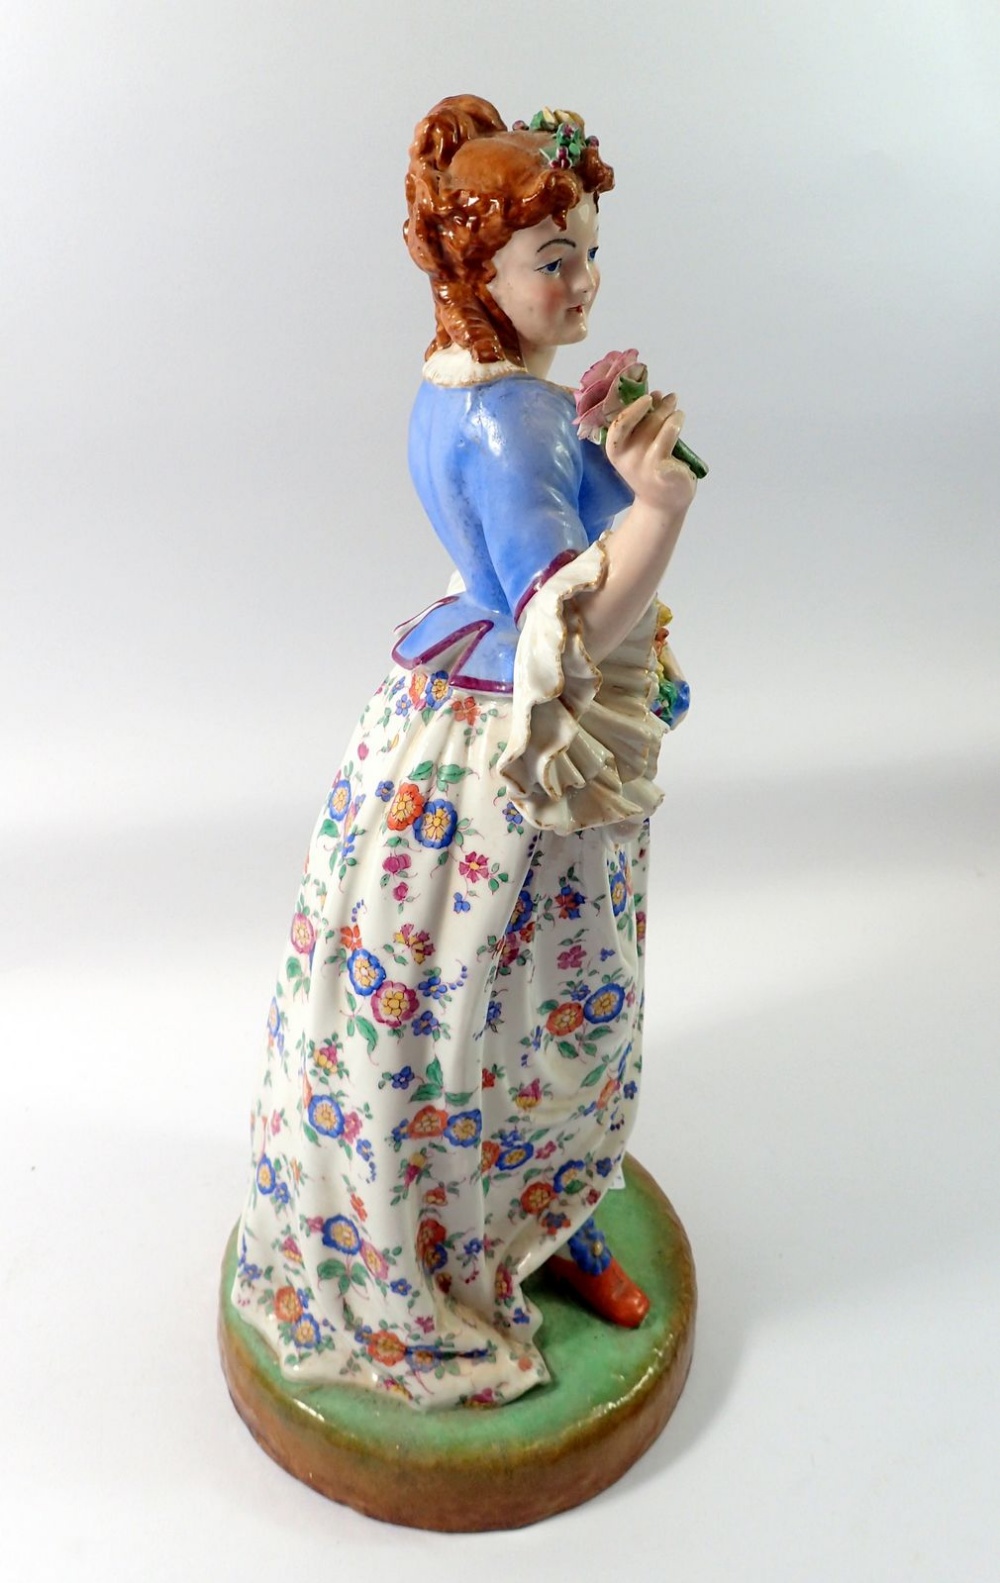 A 19th century French porcelain large figure of a woman with flowers, 44cm tall - Image 2 of 2